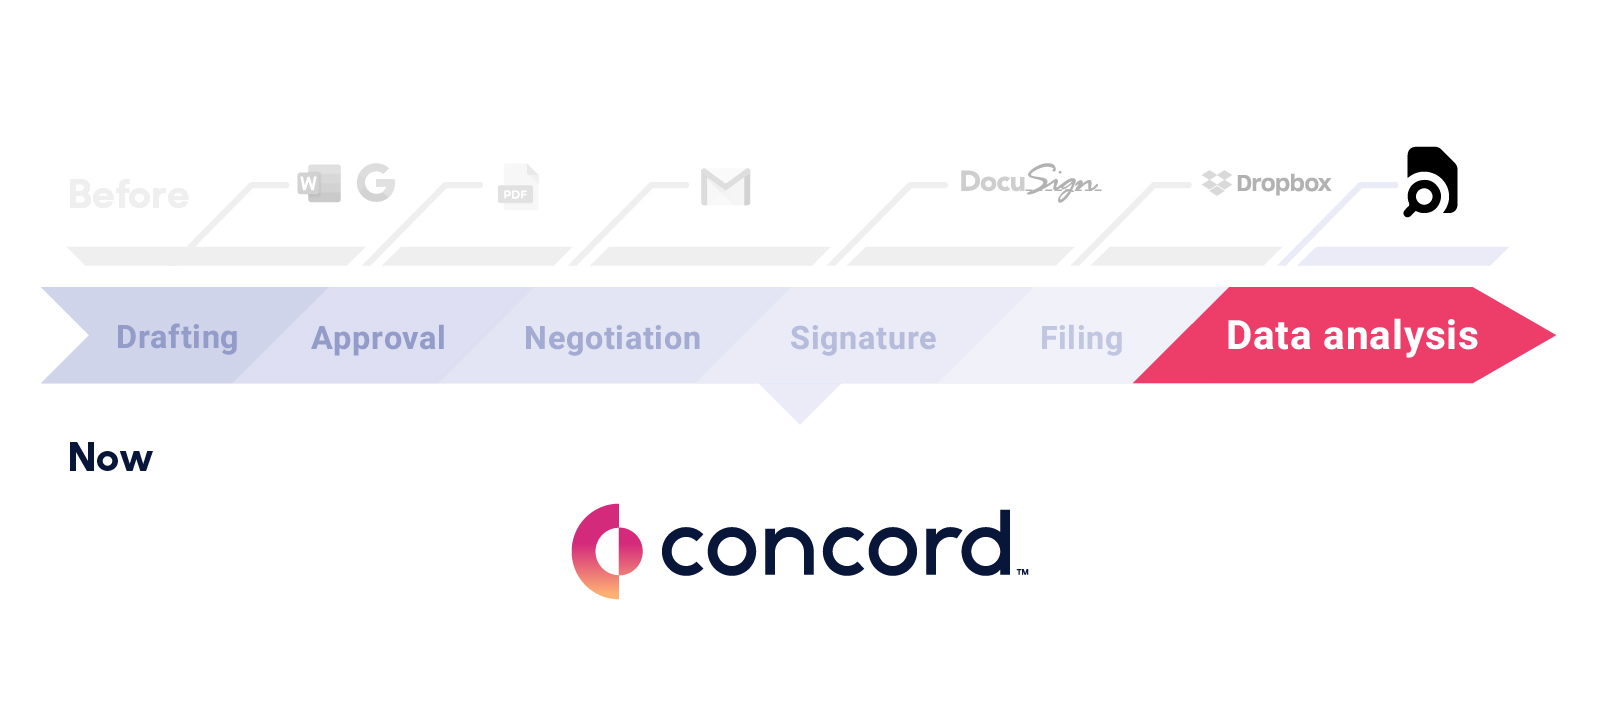 The final stage of the contract lifecycle is tracking contract deadlines and renewal dates.